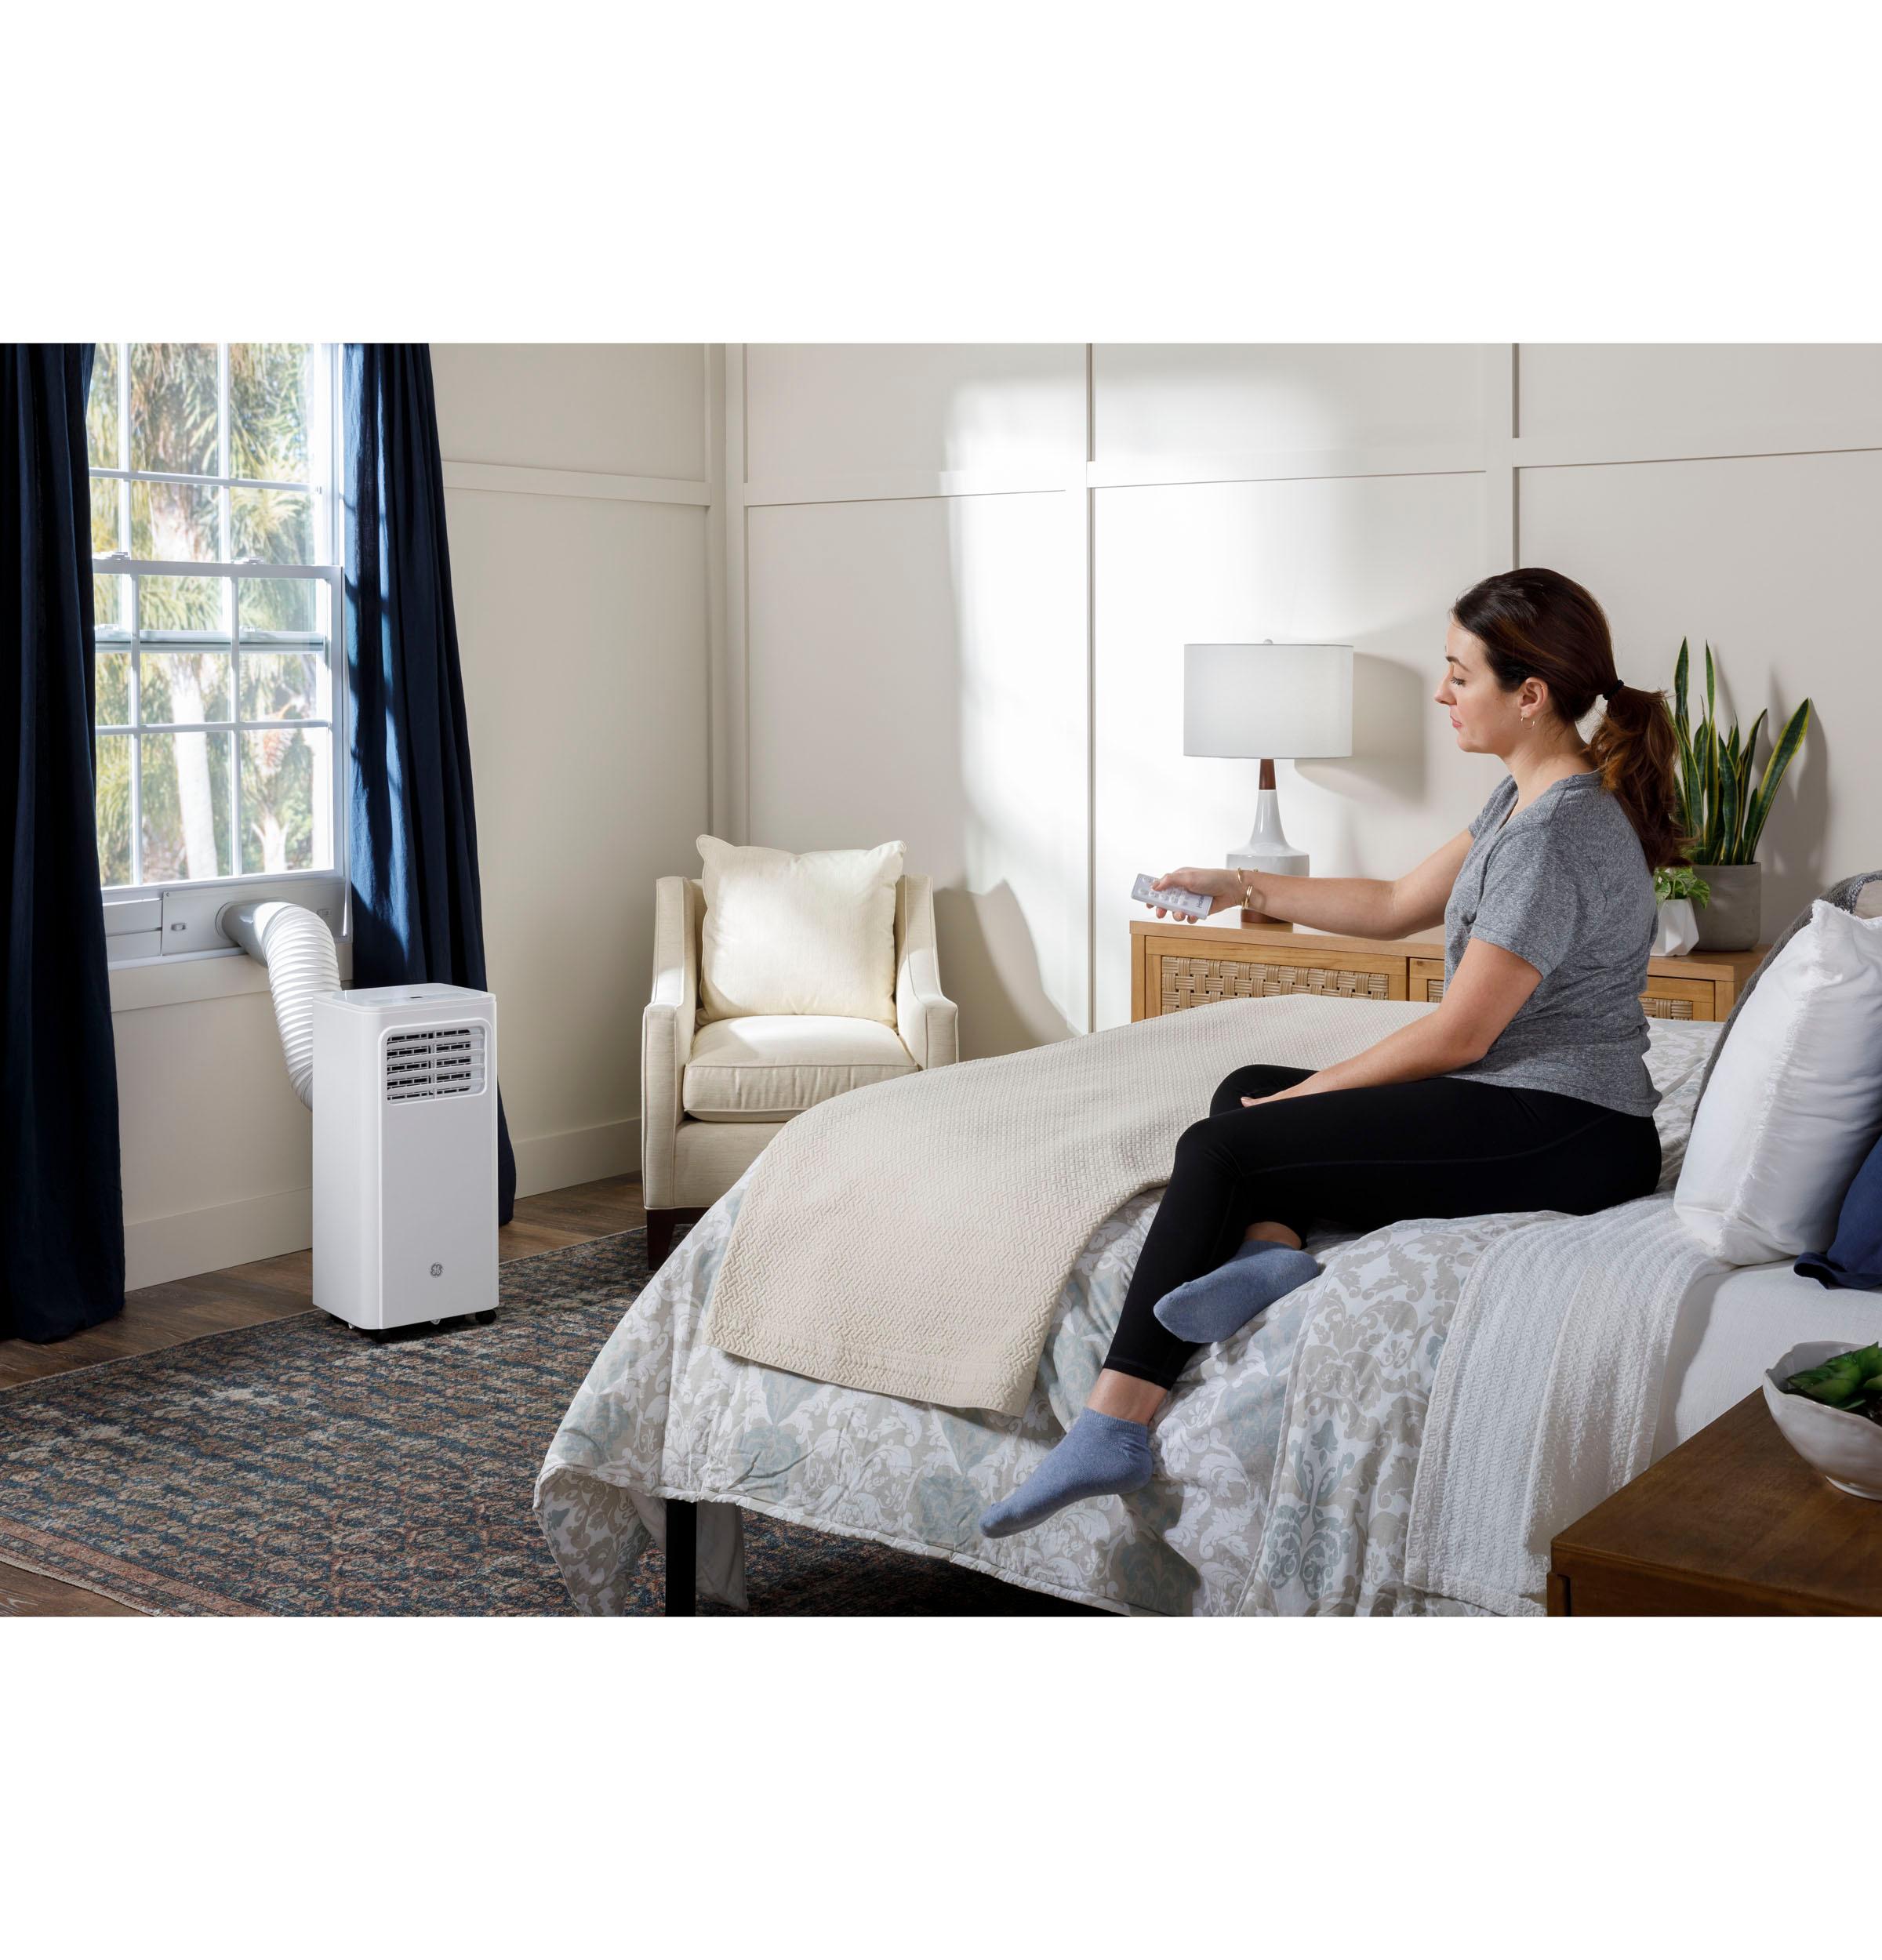 GE® 5,100 BTU Portable Air Conditioner with Dehumidifier and Remote, White